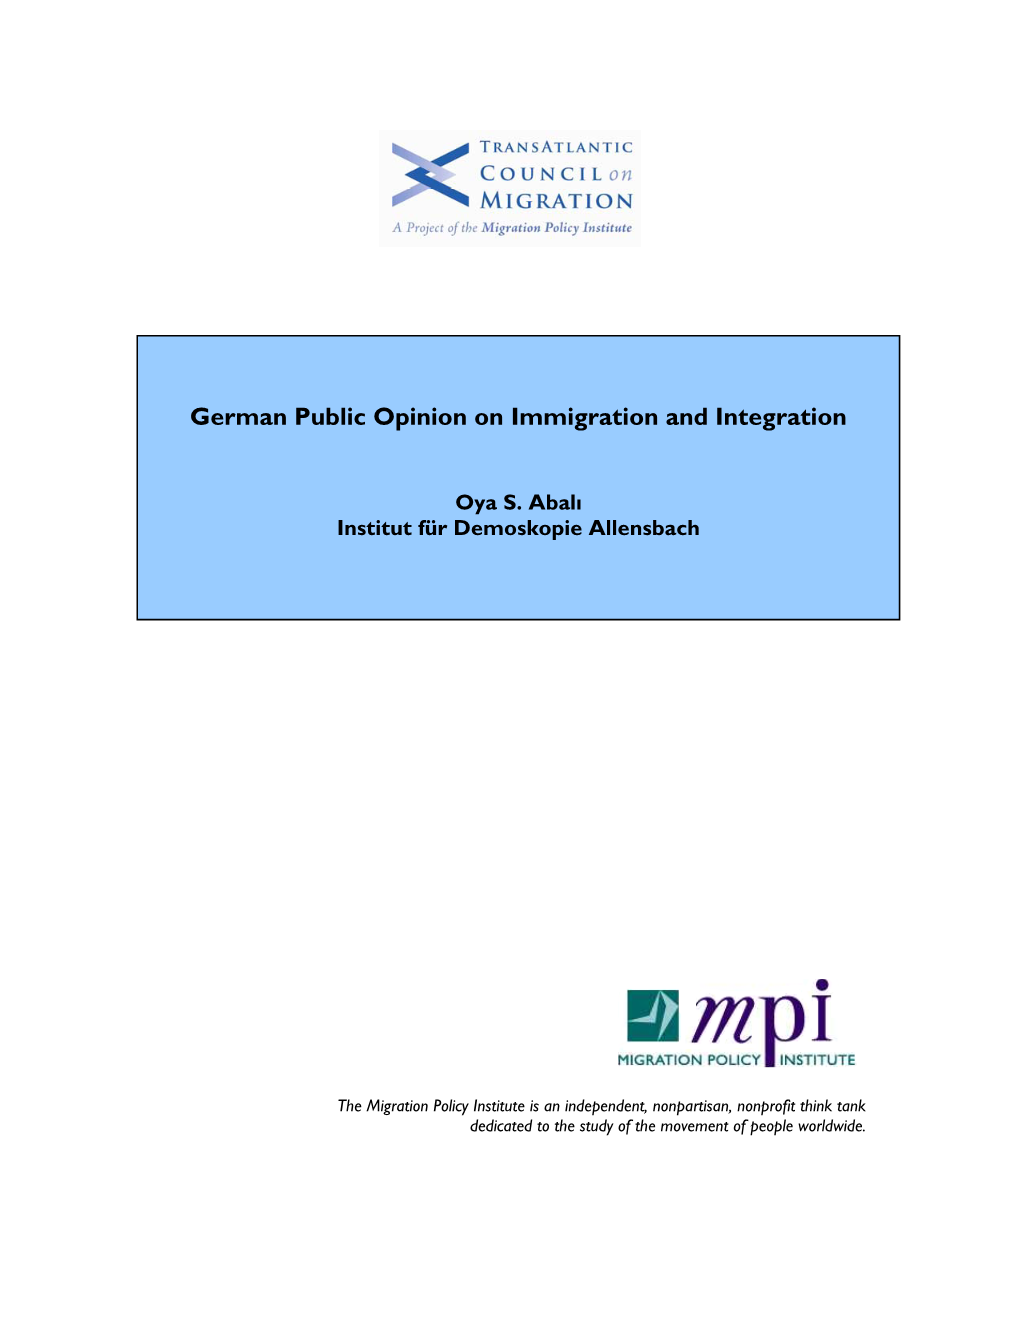 German Public Opinion on Immigration and Integration